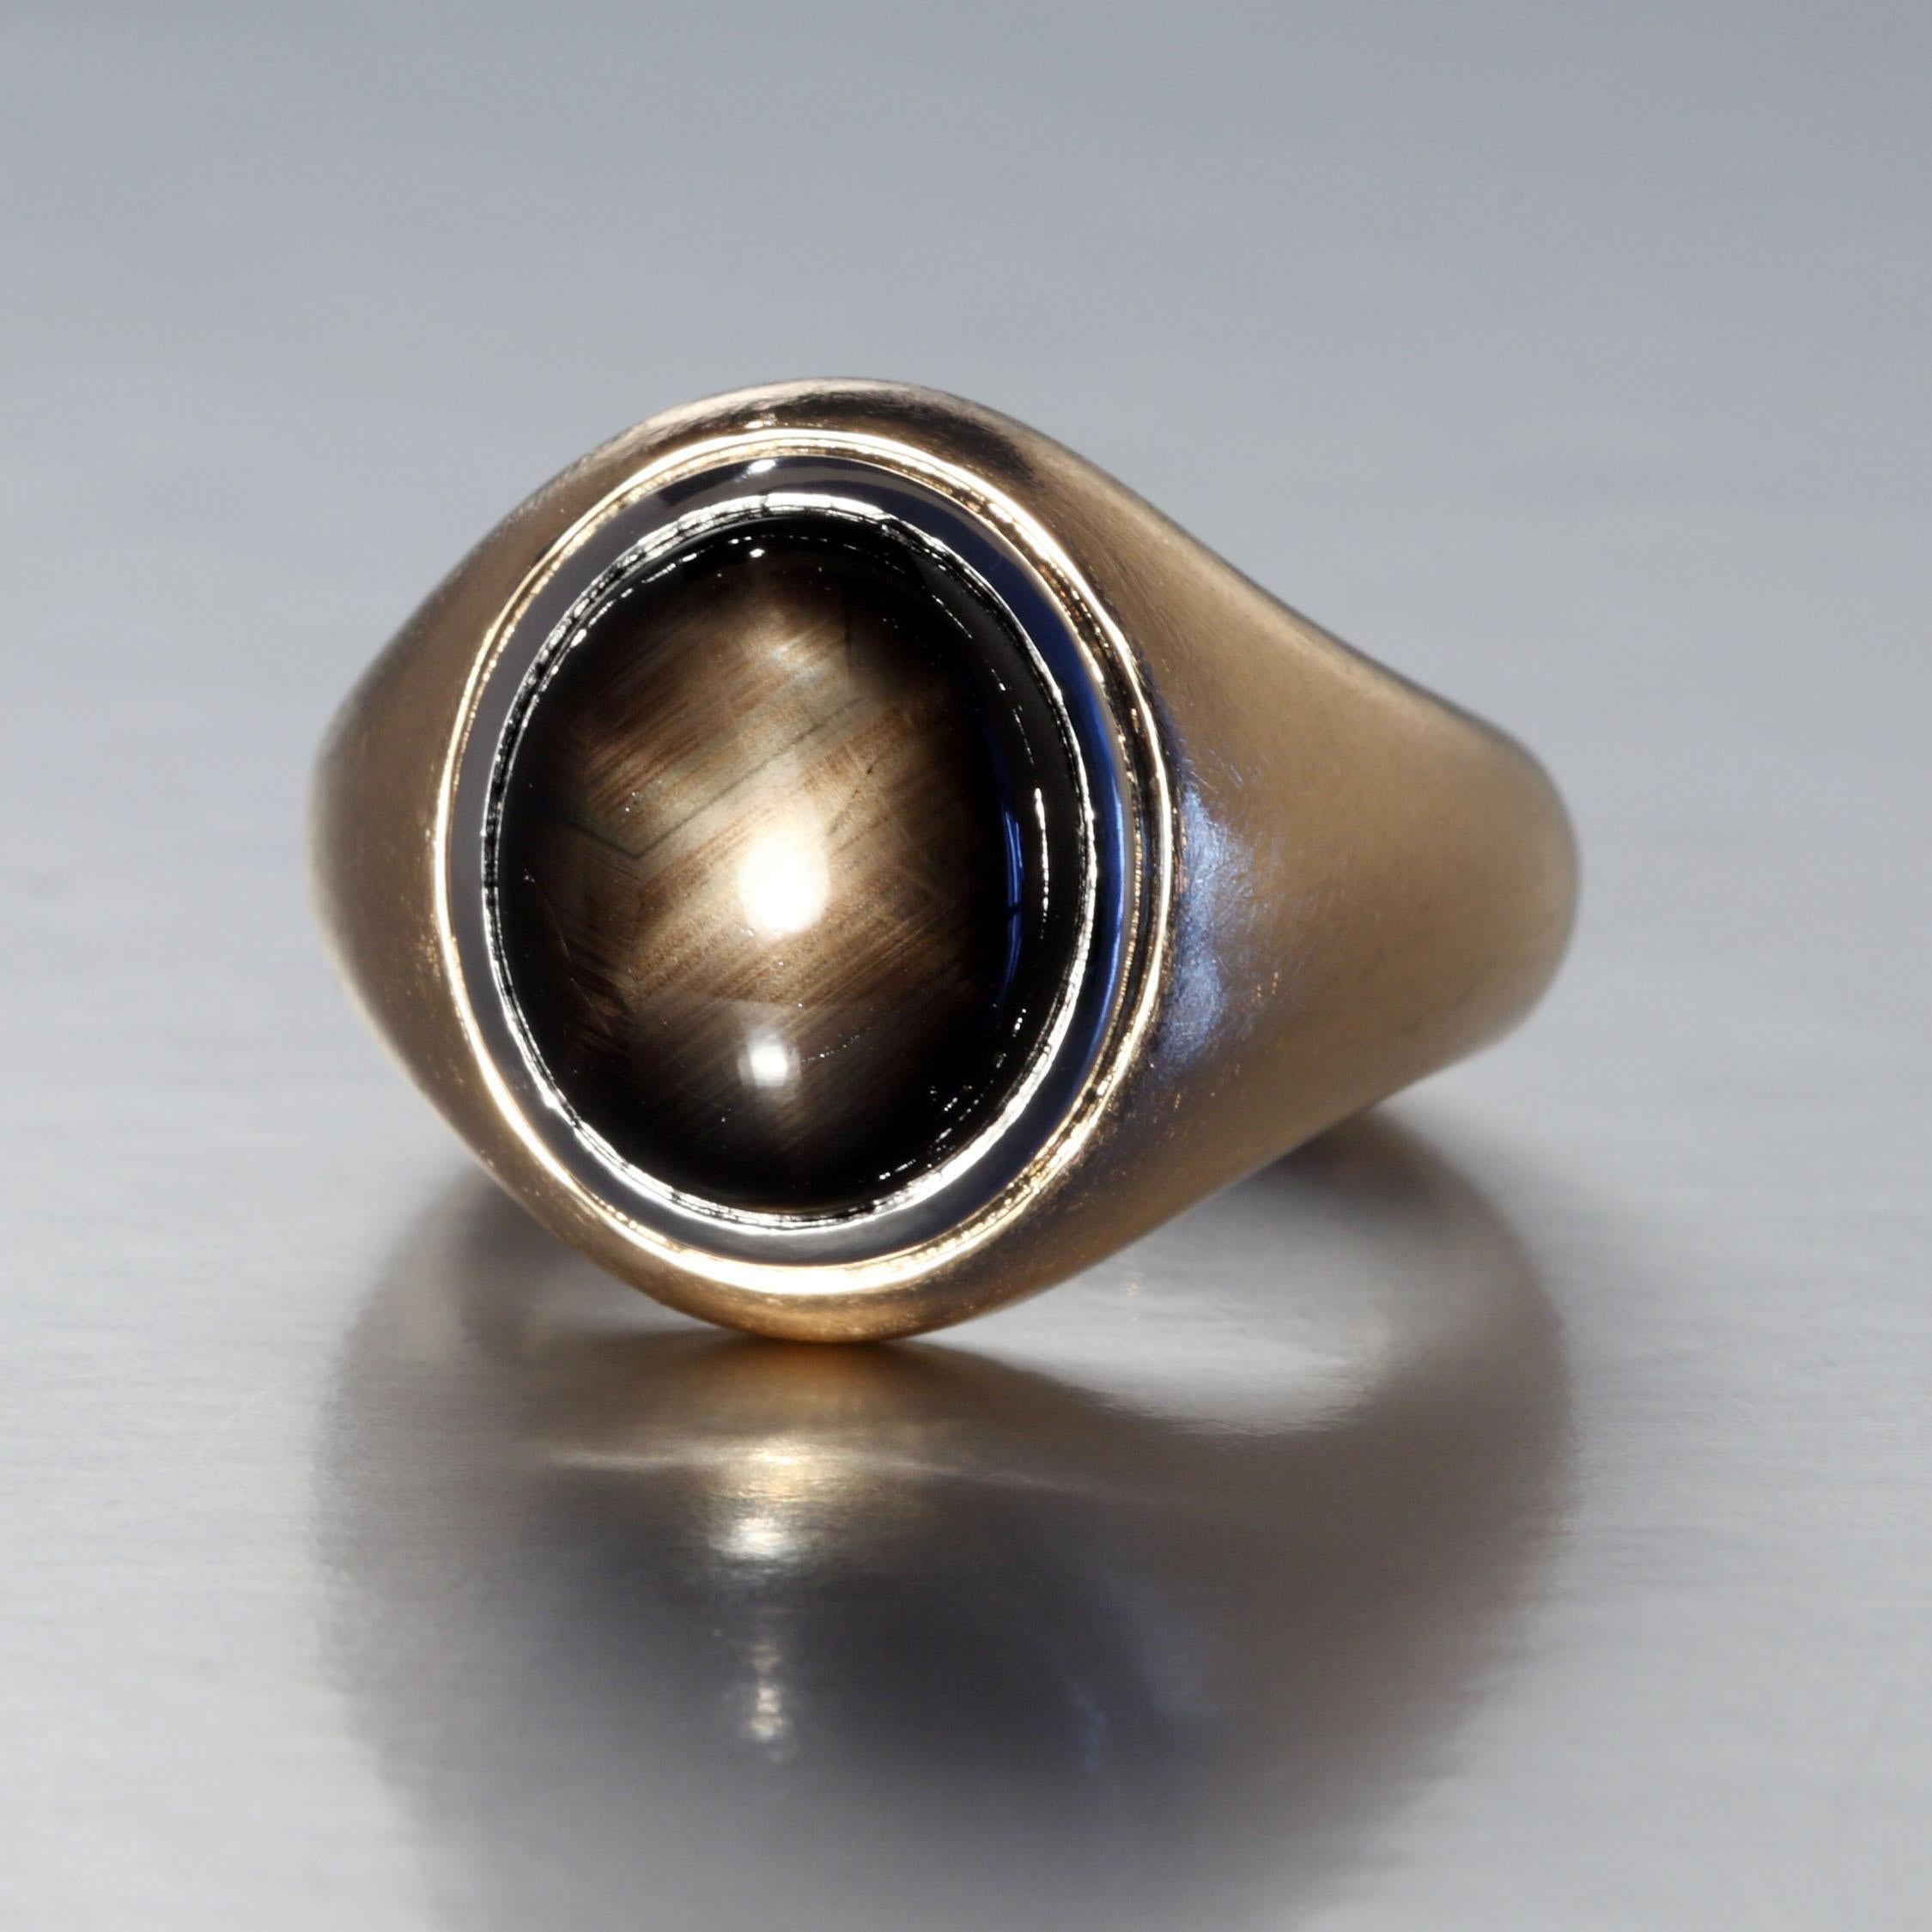 The 11.66 carat oval cabochon cut black star sapphire is set in a platinum rim and mounted in a rose gold ring with a matt finish. An inner spring moves easily over the knuckle and holds the ring in place. This one of a kind piece is designed and